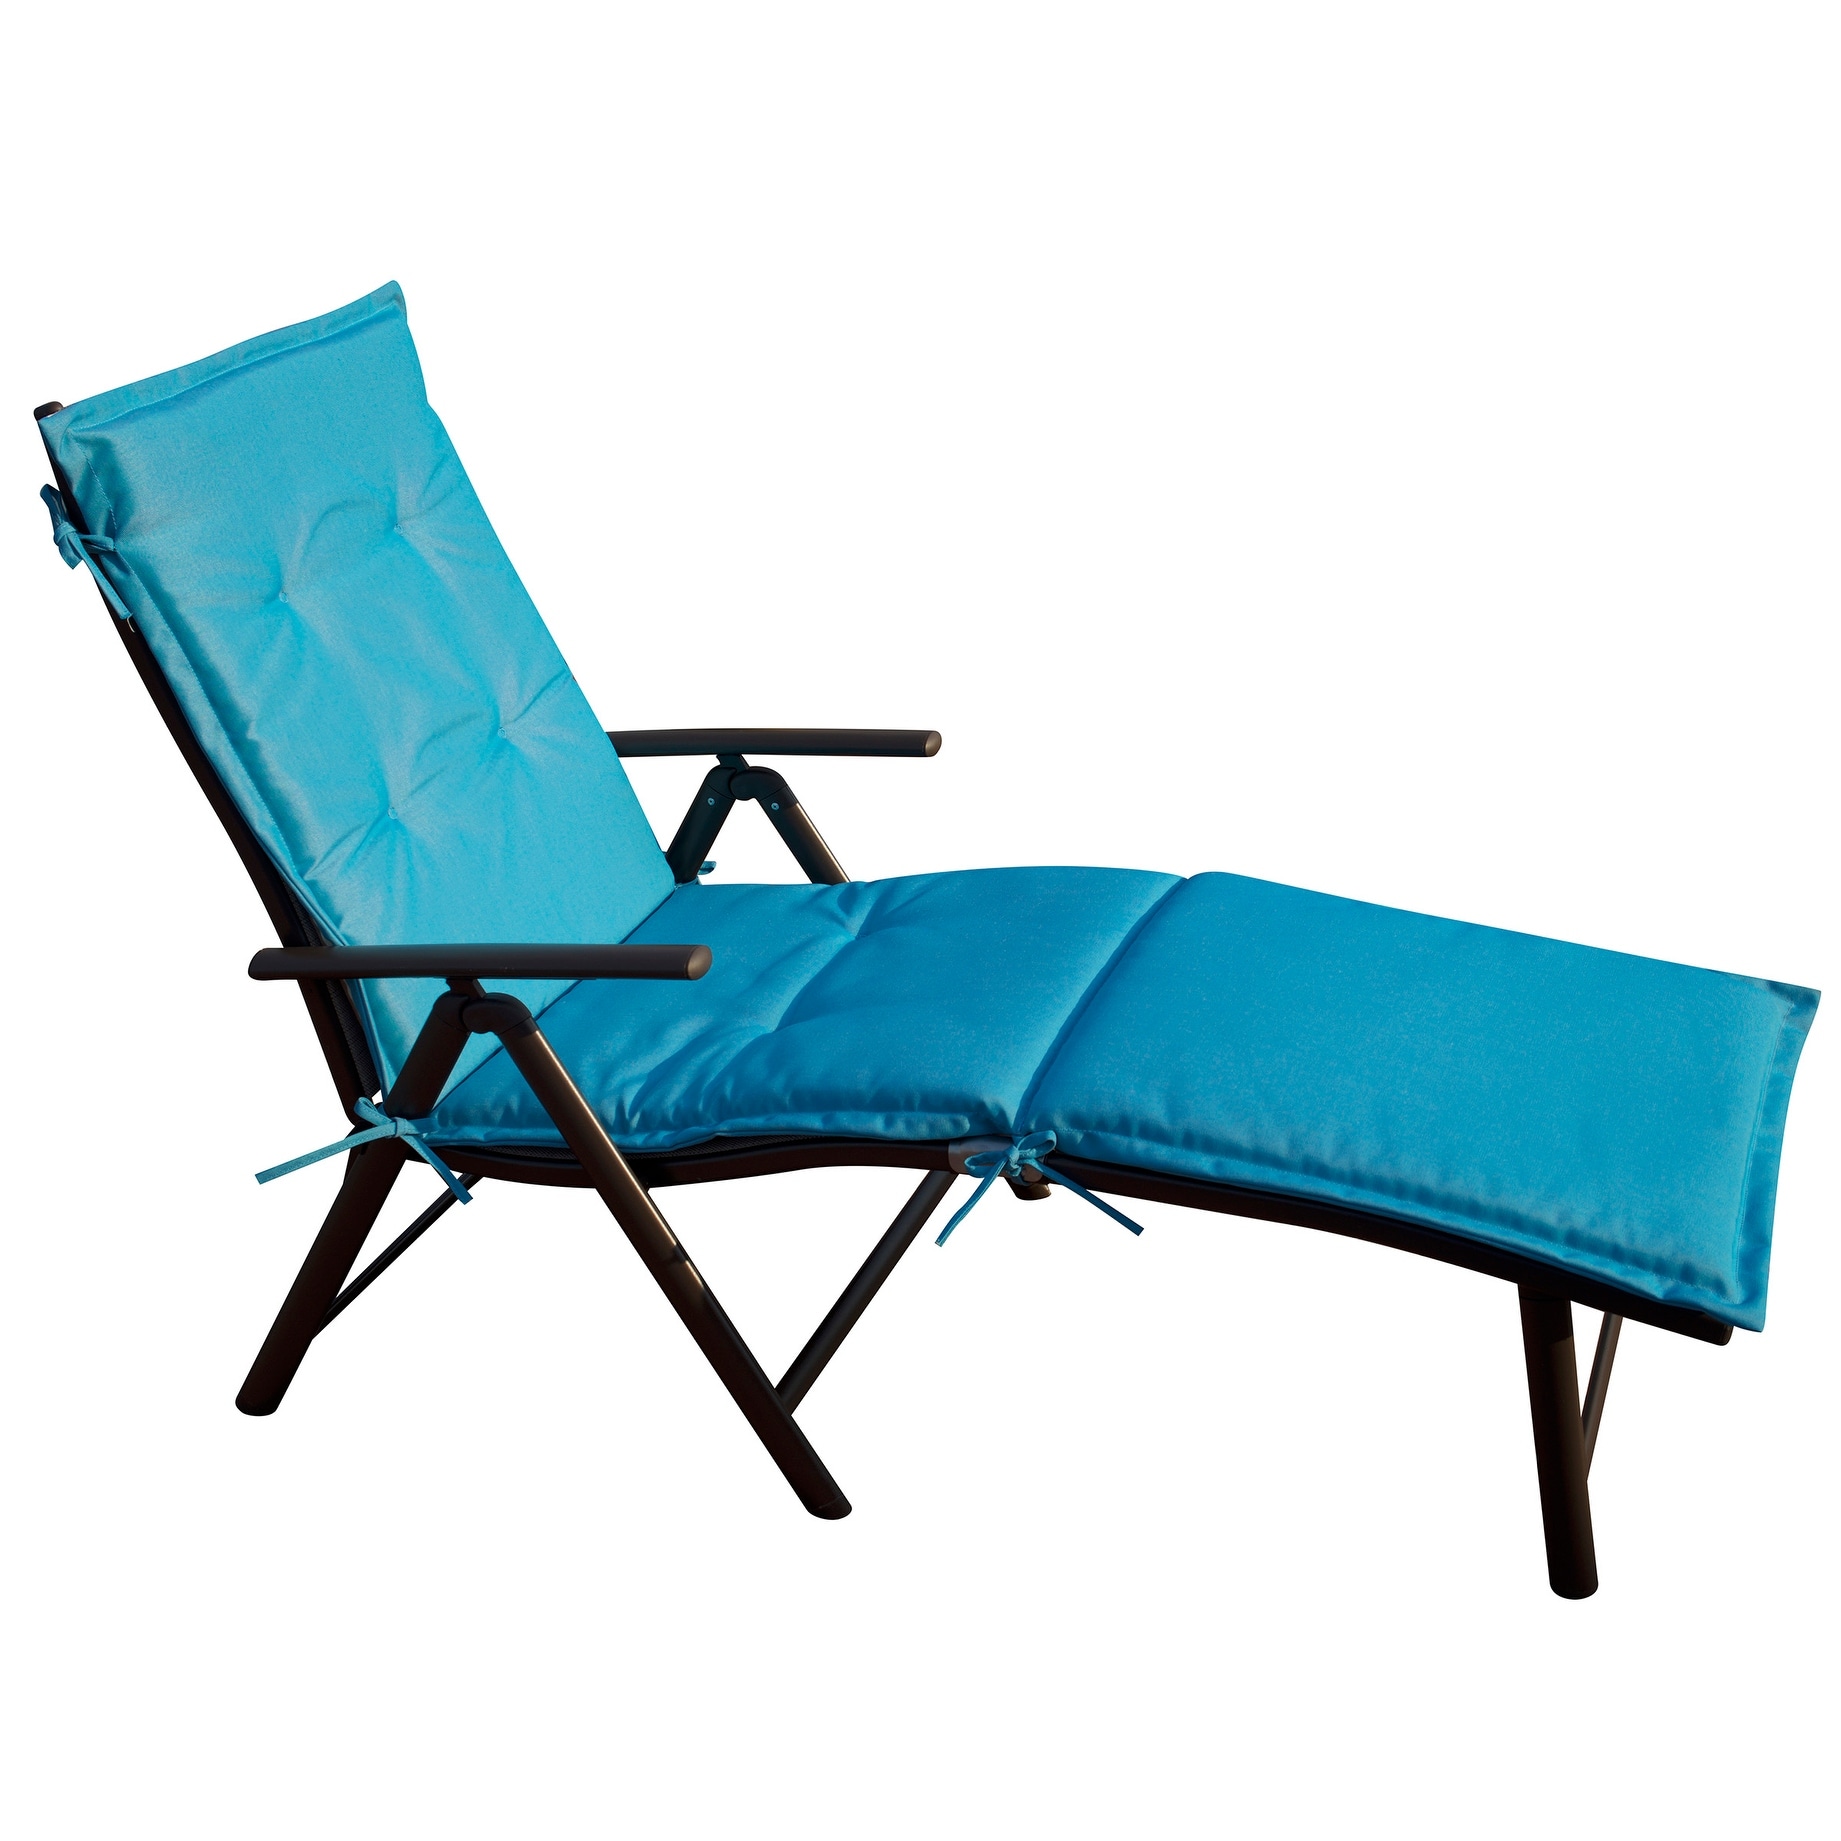 https://ak1.ostkcdn.com/images/products/is/images/direct/f12cf233990633ac71355660fe7592911a78b69e/Kozyard-Cozy-Aluminum-Beach-Yard-Pool-Folding-Reclining-7-Adjustable-Chaise-Lounge-Chair-with-Cushion.jpg